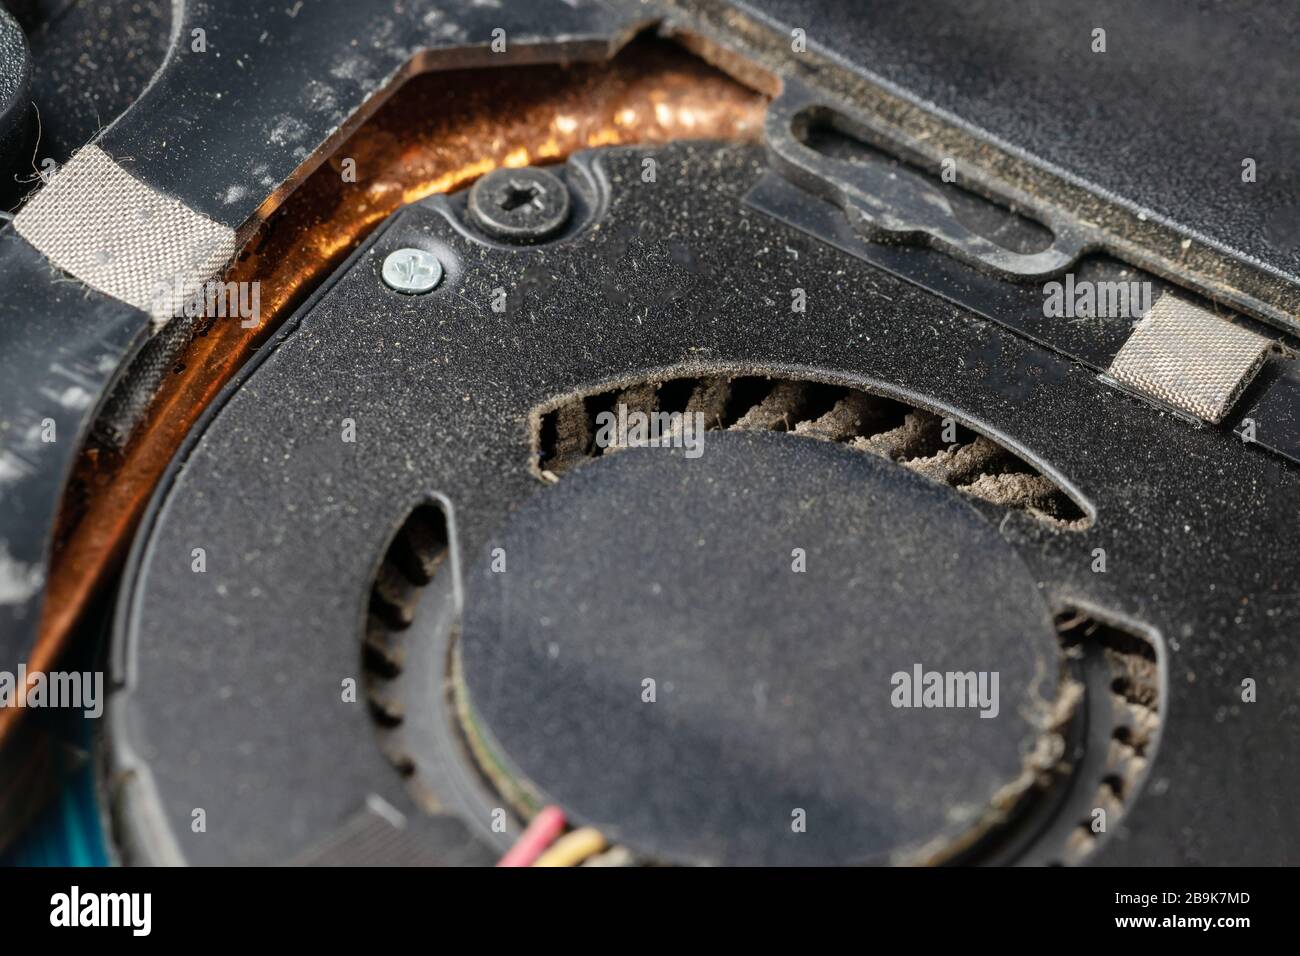 Very dirty, dusty laptop cooling system inside. Notebook with cover removed for cleaning and repair. Stock Photo